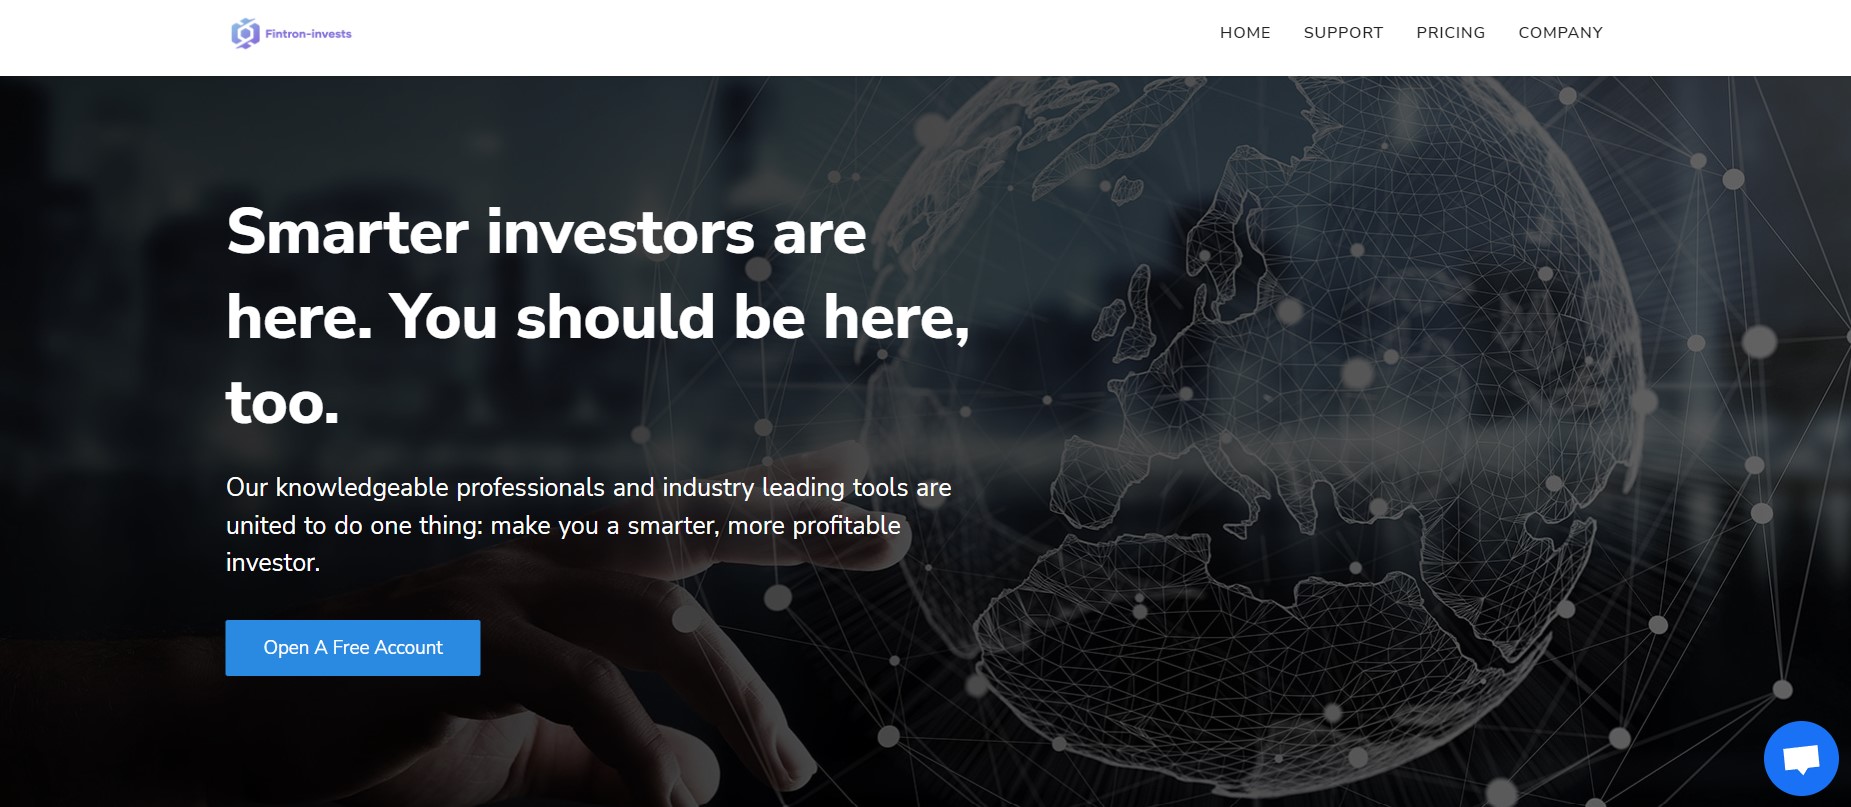 Fintron Invests